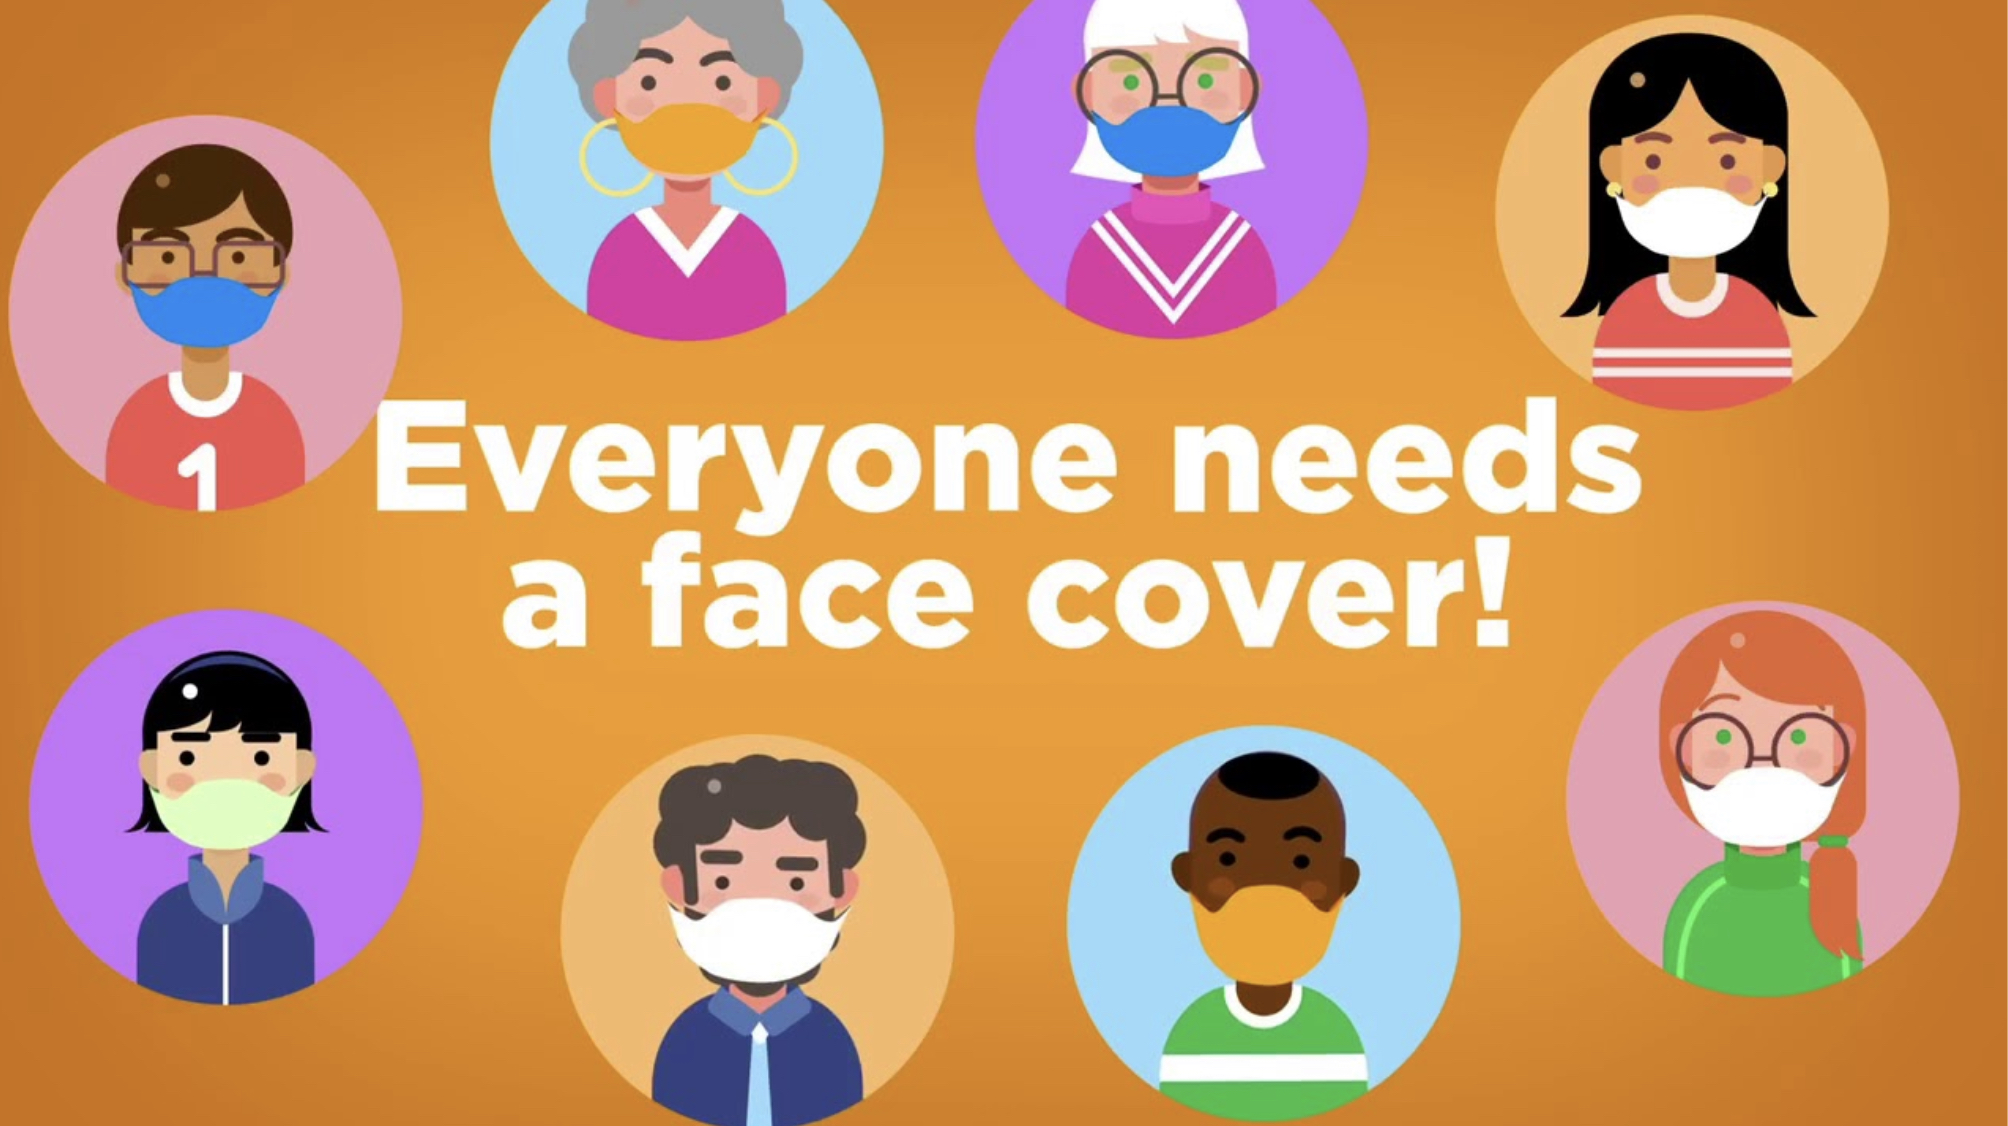 Everyone needs a face cover